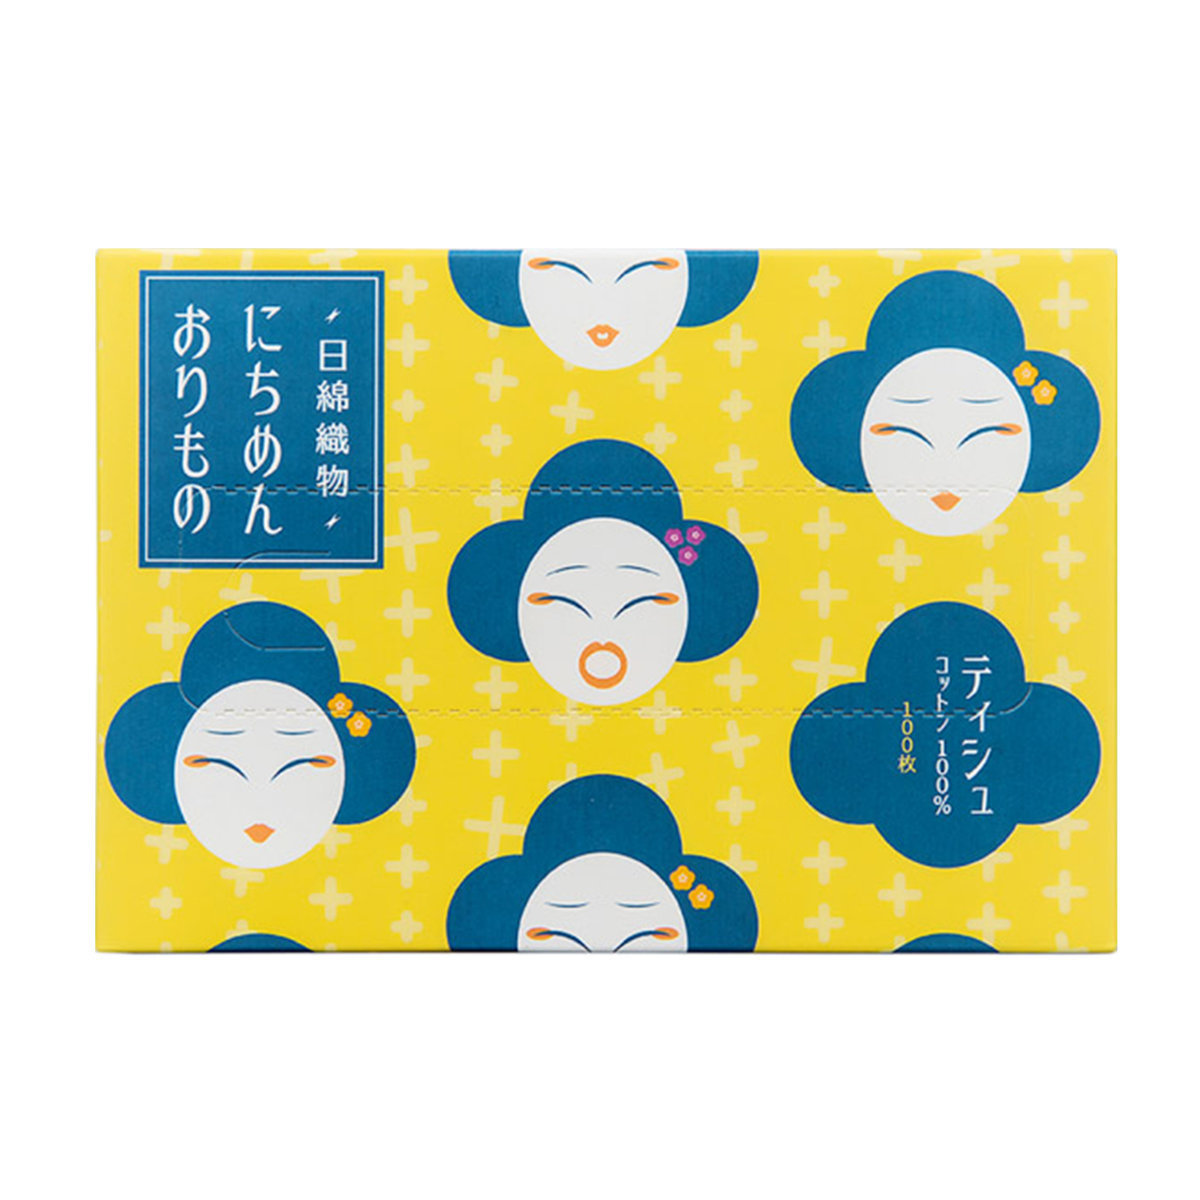 Moritachicosme Made In Japan 100 Cotton Dry Towels 100pcs Japanese 